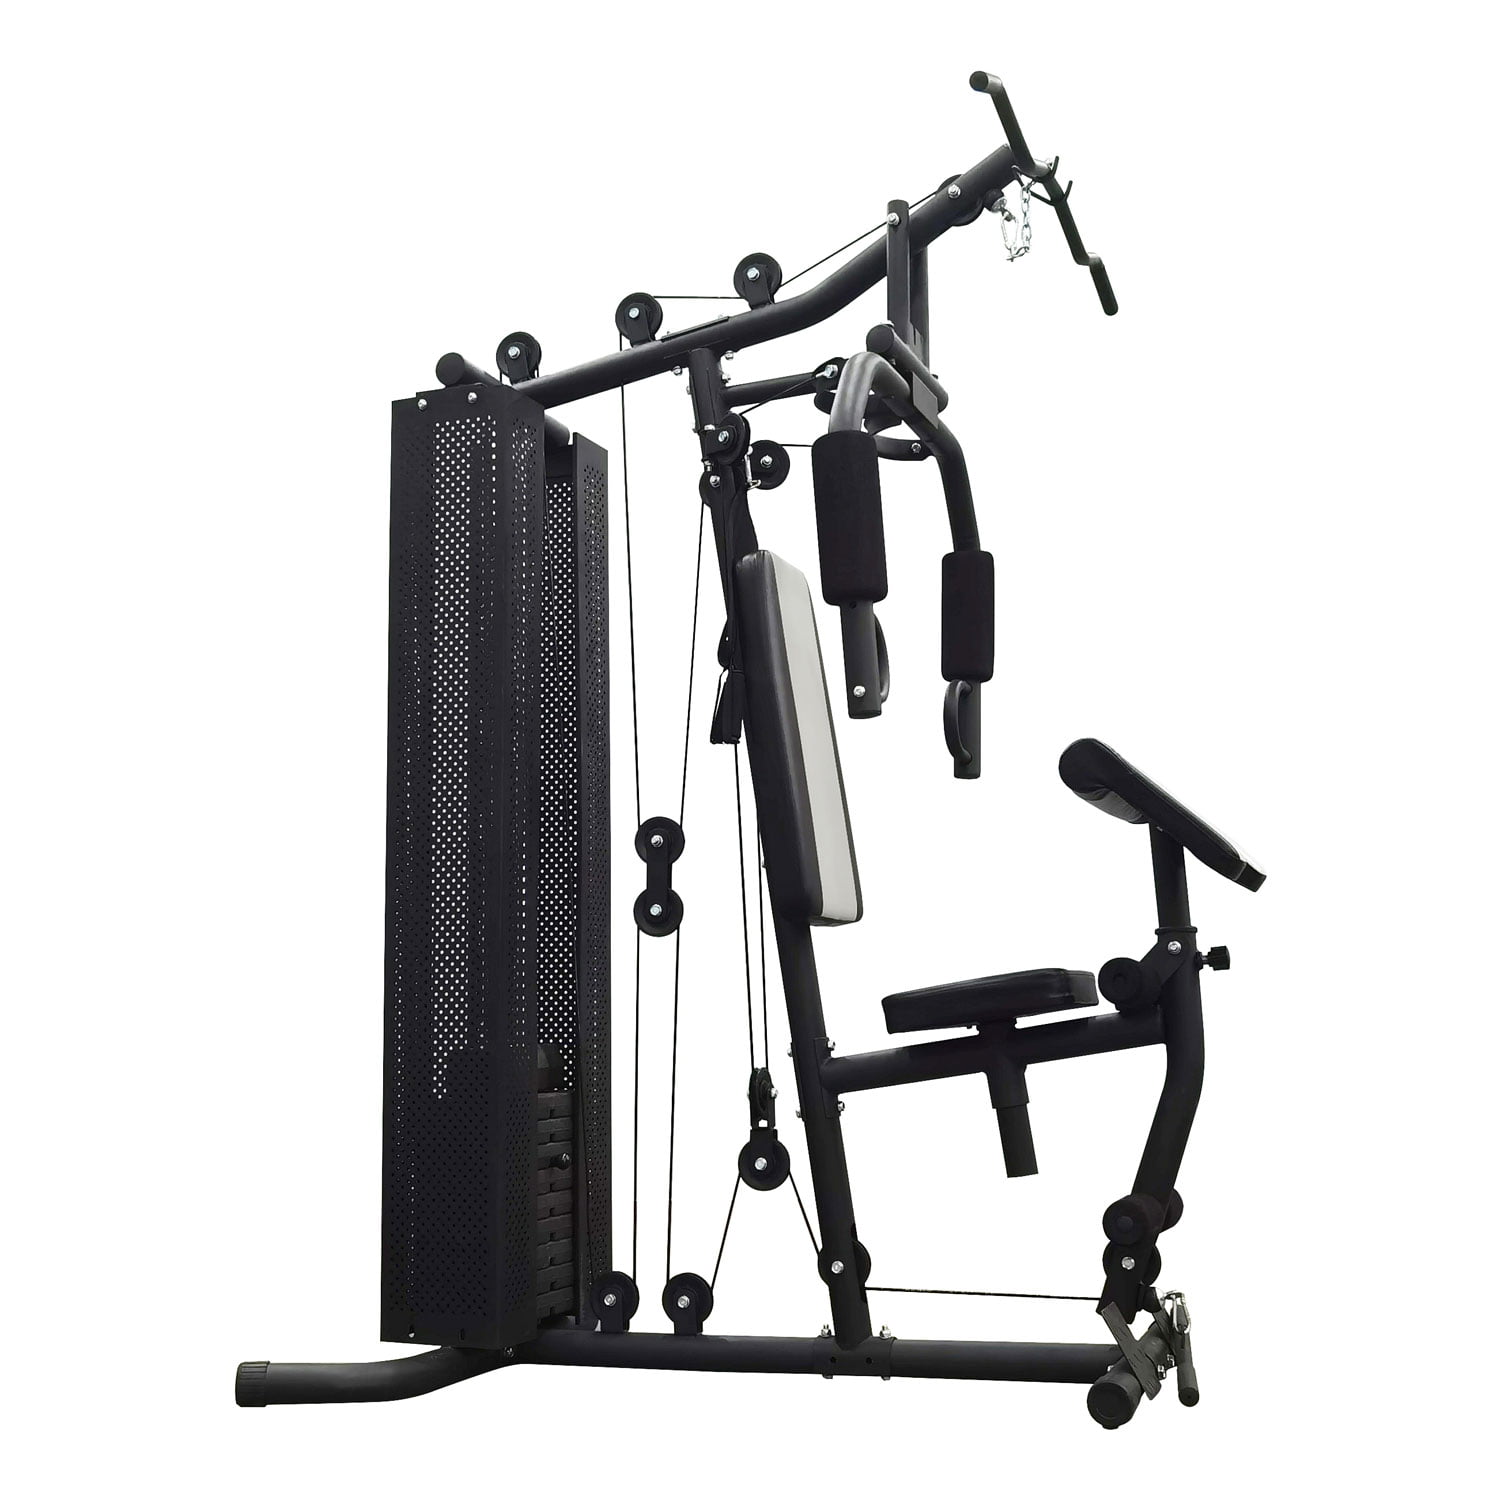 8 Home Gym Essentials – Tried and Tested Workout Equipment – HomewithB